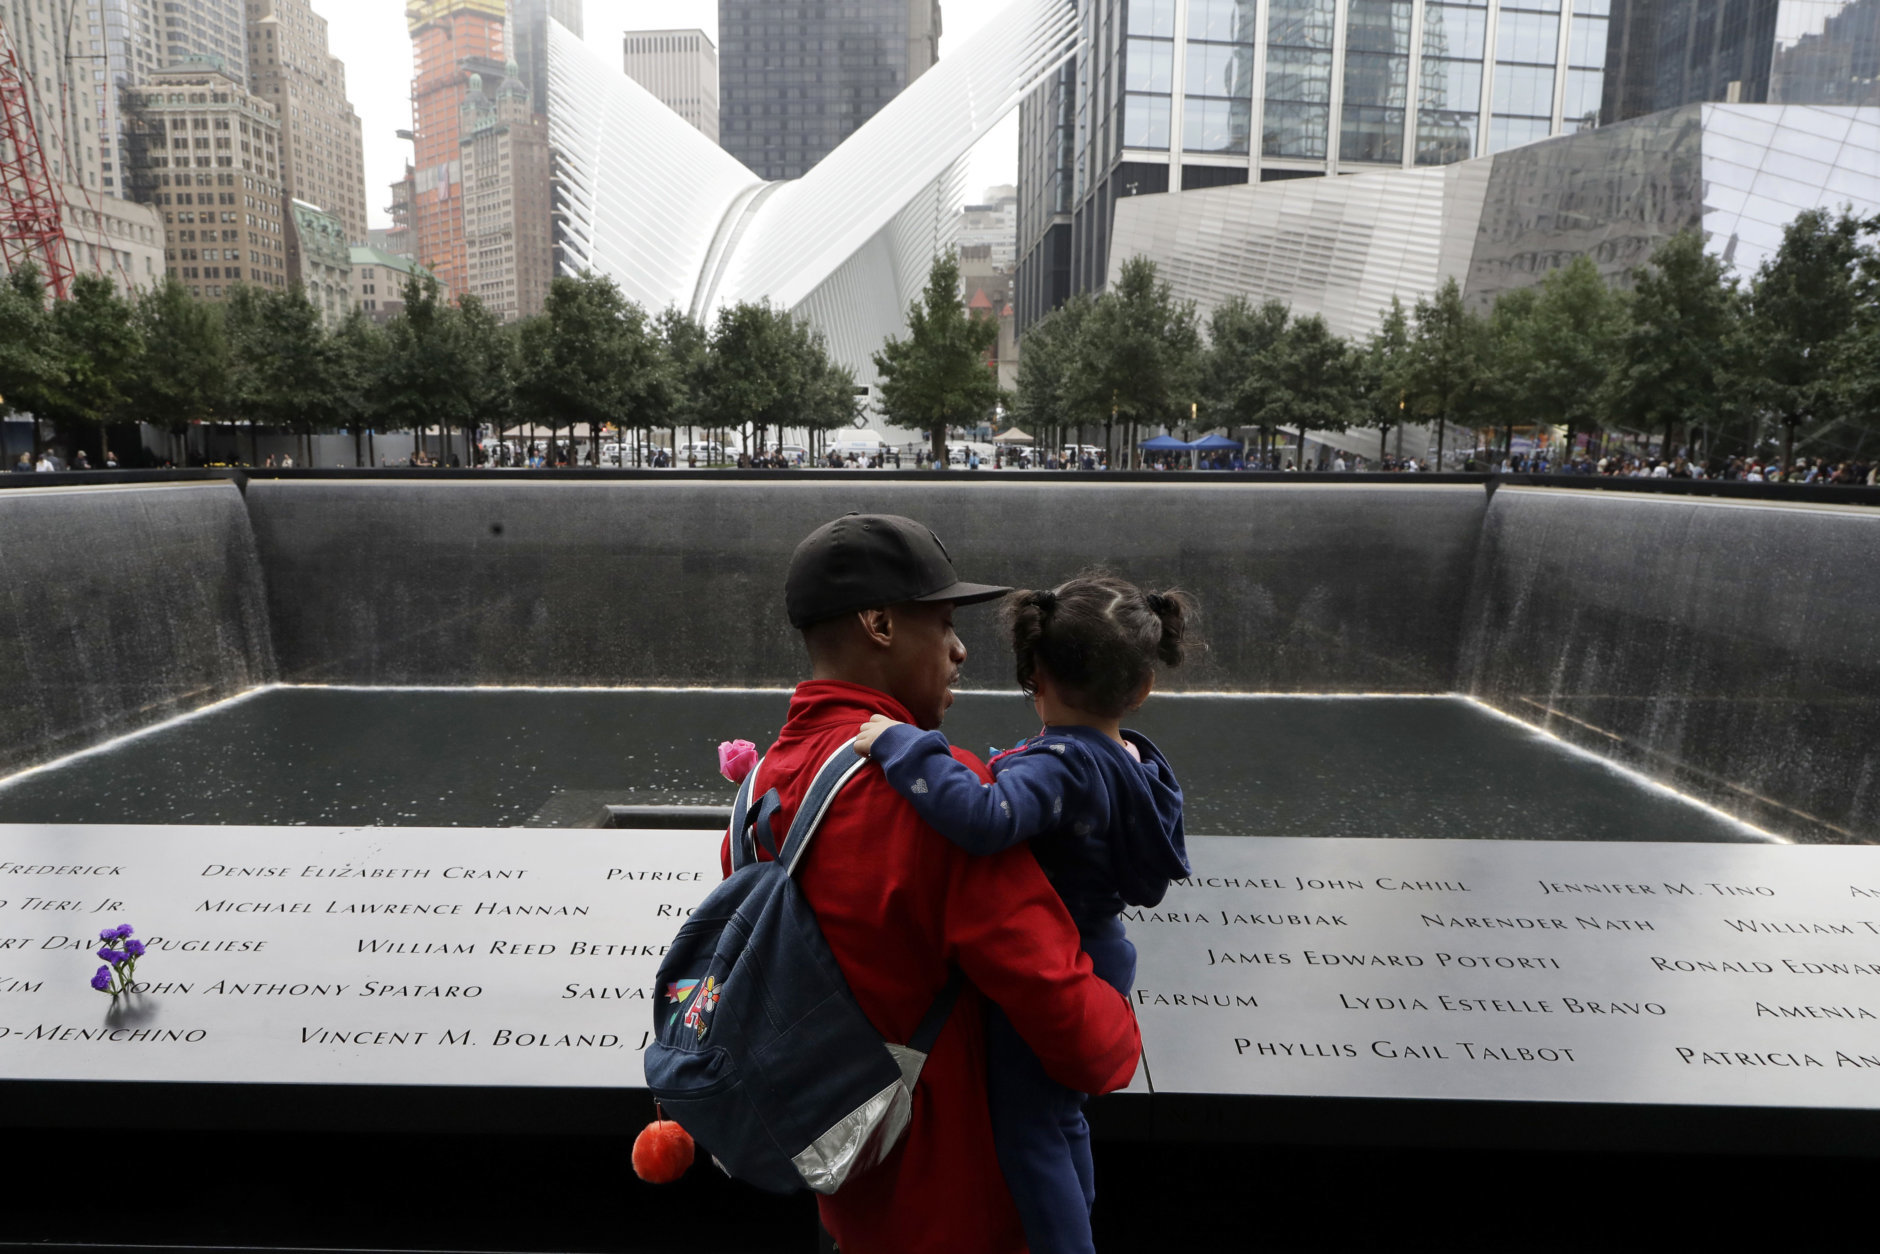 A man talks with a girl as they look at the North Pool at the World Trade Center during a ceremony marking the 17th anniversary of the terrorist attacks on the United States, Tuesday, Sept. 11, 2018, in New York. (AP Photo/Mark Lennihan)